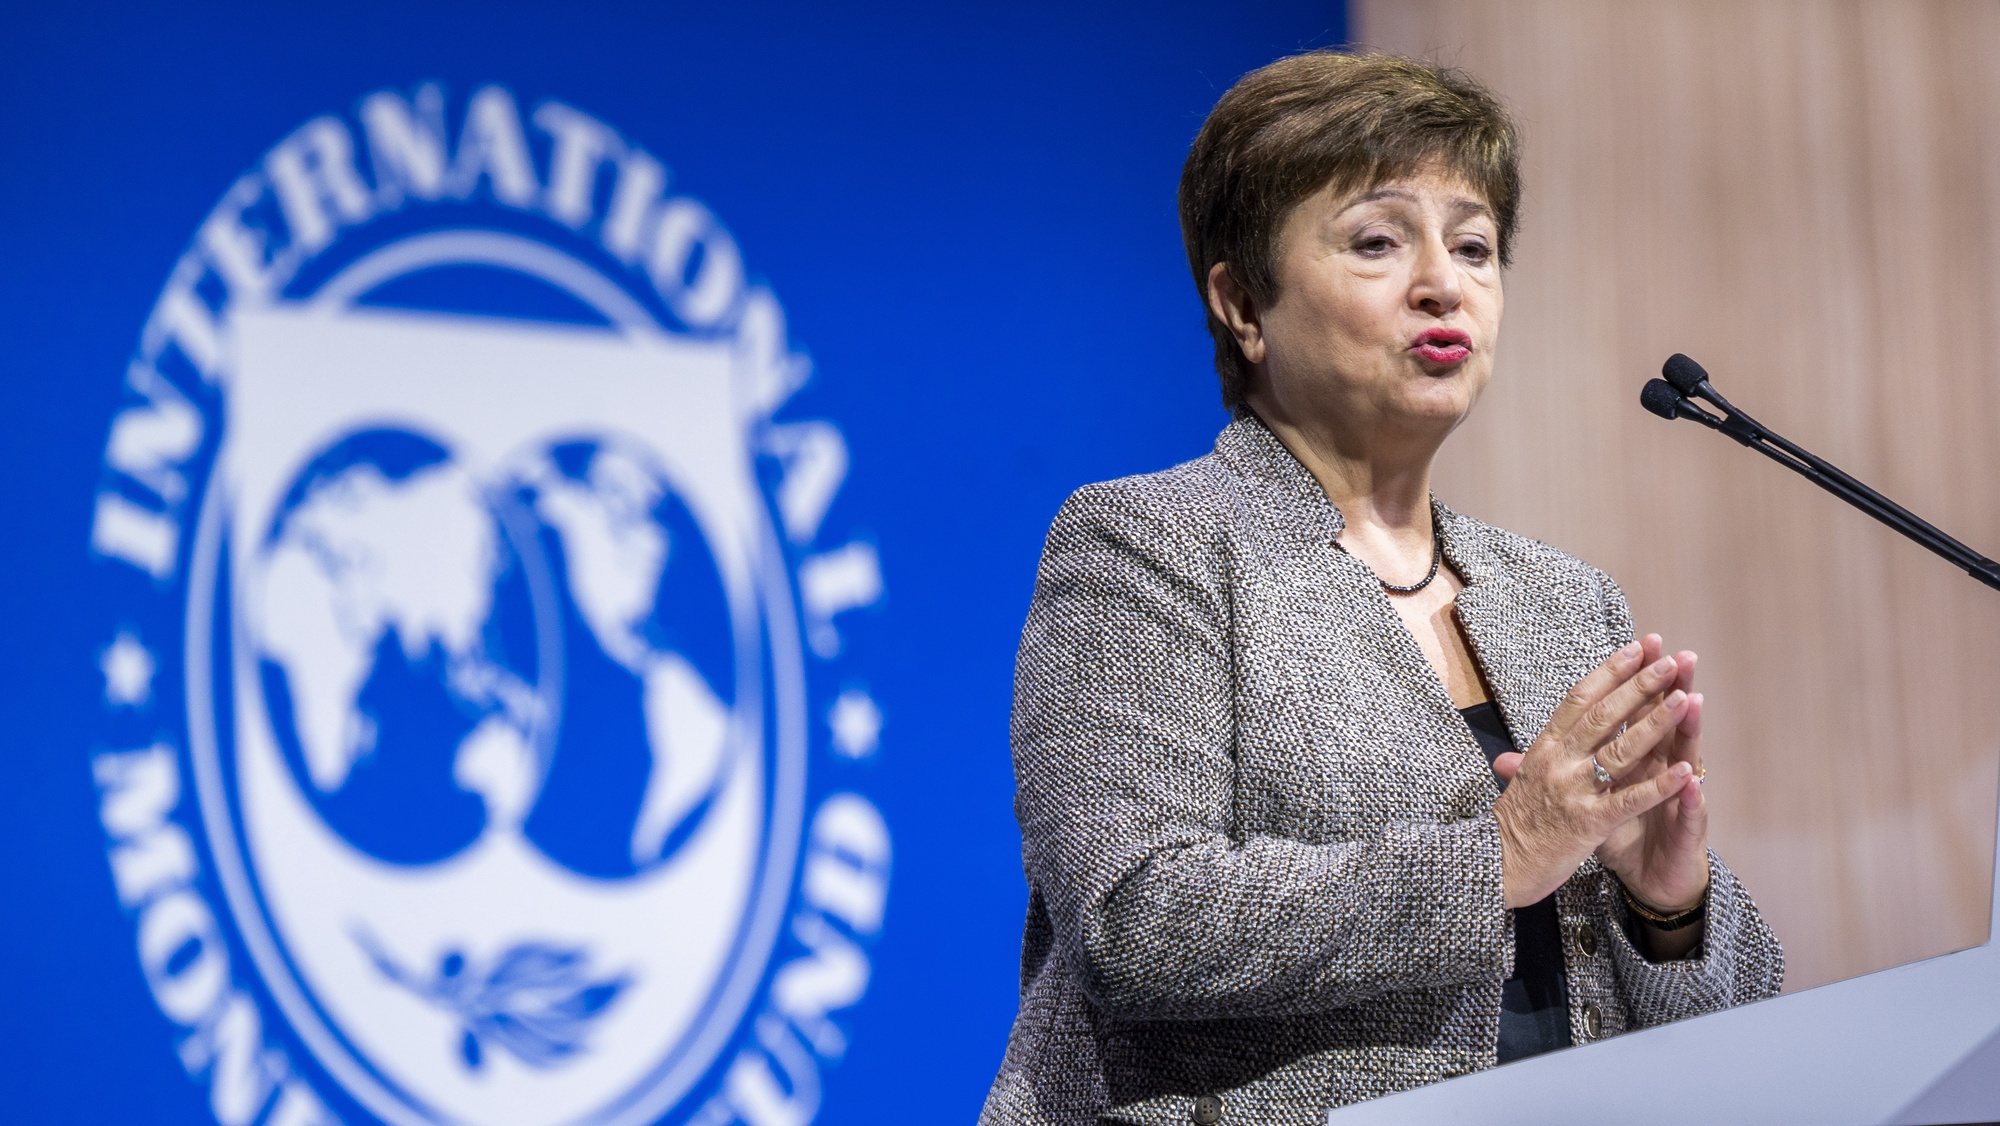 epa10243615 Managing Director of the International Monetary Fund (IMF) Kristalina Georgieva delivers remarks at the 2022 Annual Meetings Plenary session during the 2022 Annual Meetings of the IMF and the World Bank Group (WBG) in Washington, DC, USA, 14 October 2022. The meetings run from 10 October to 16 October.  EPA/SHAWN THEW